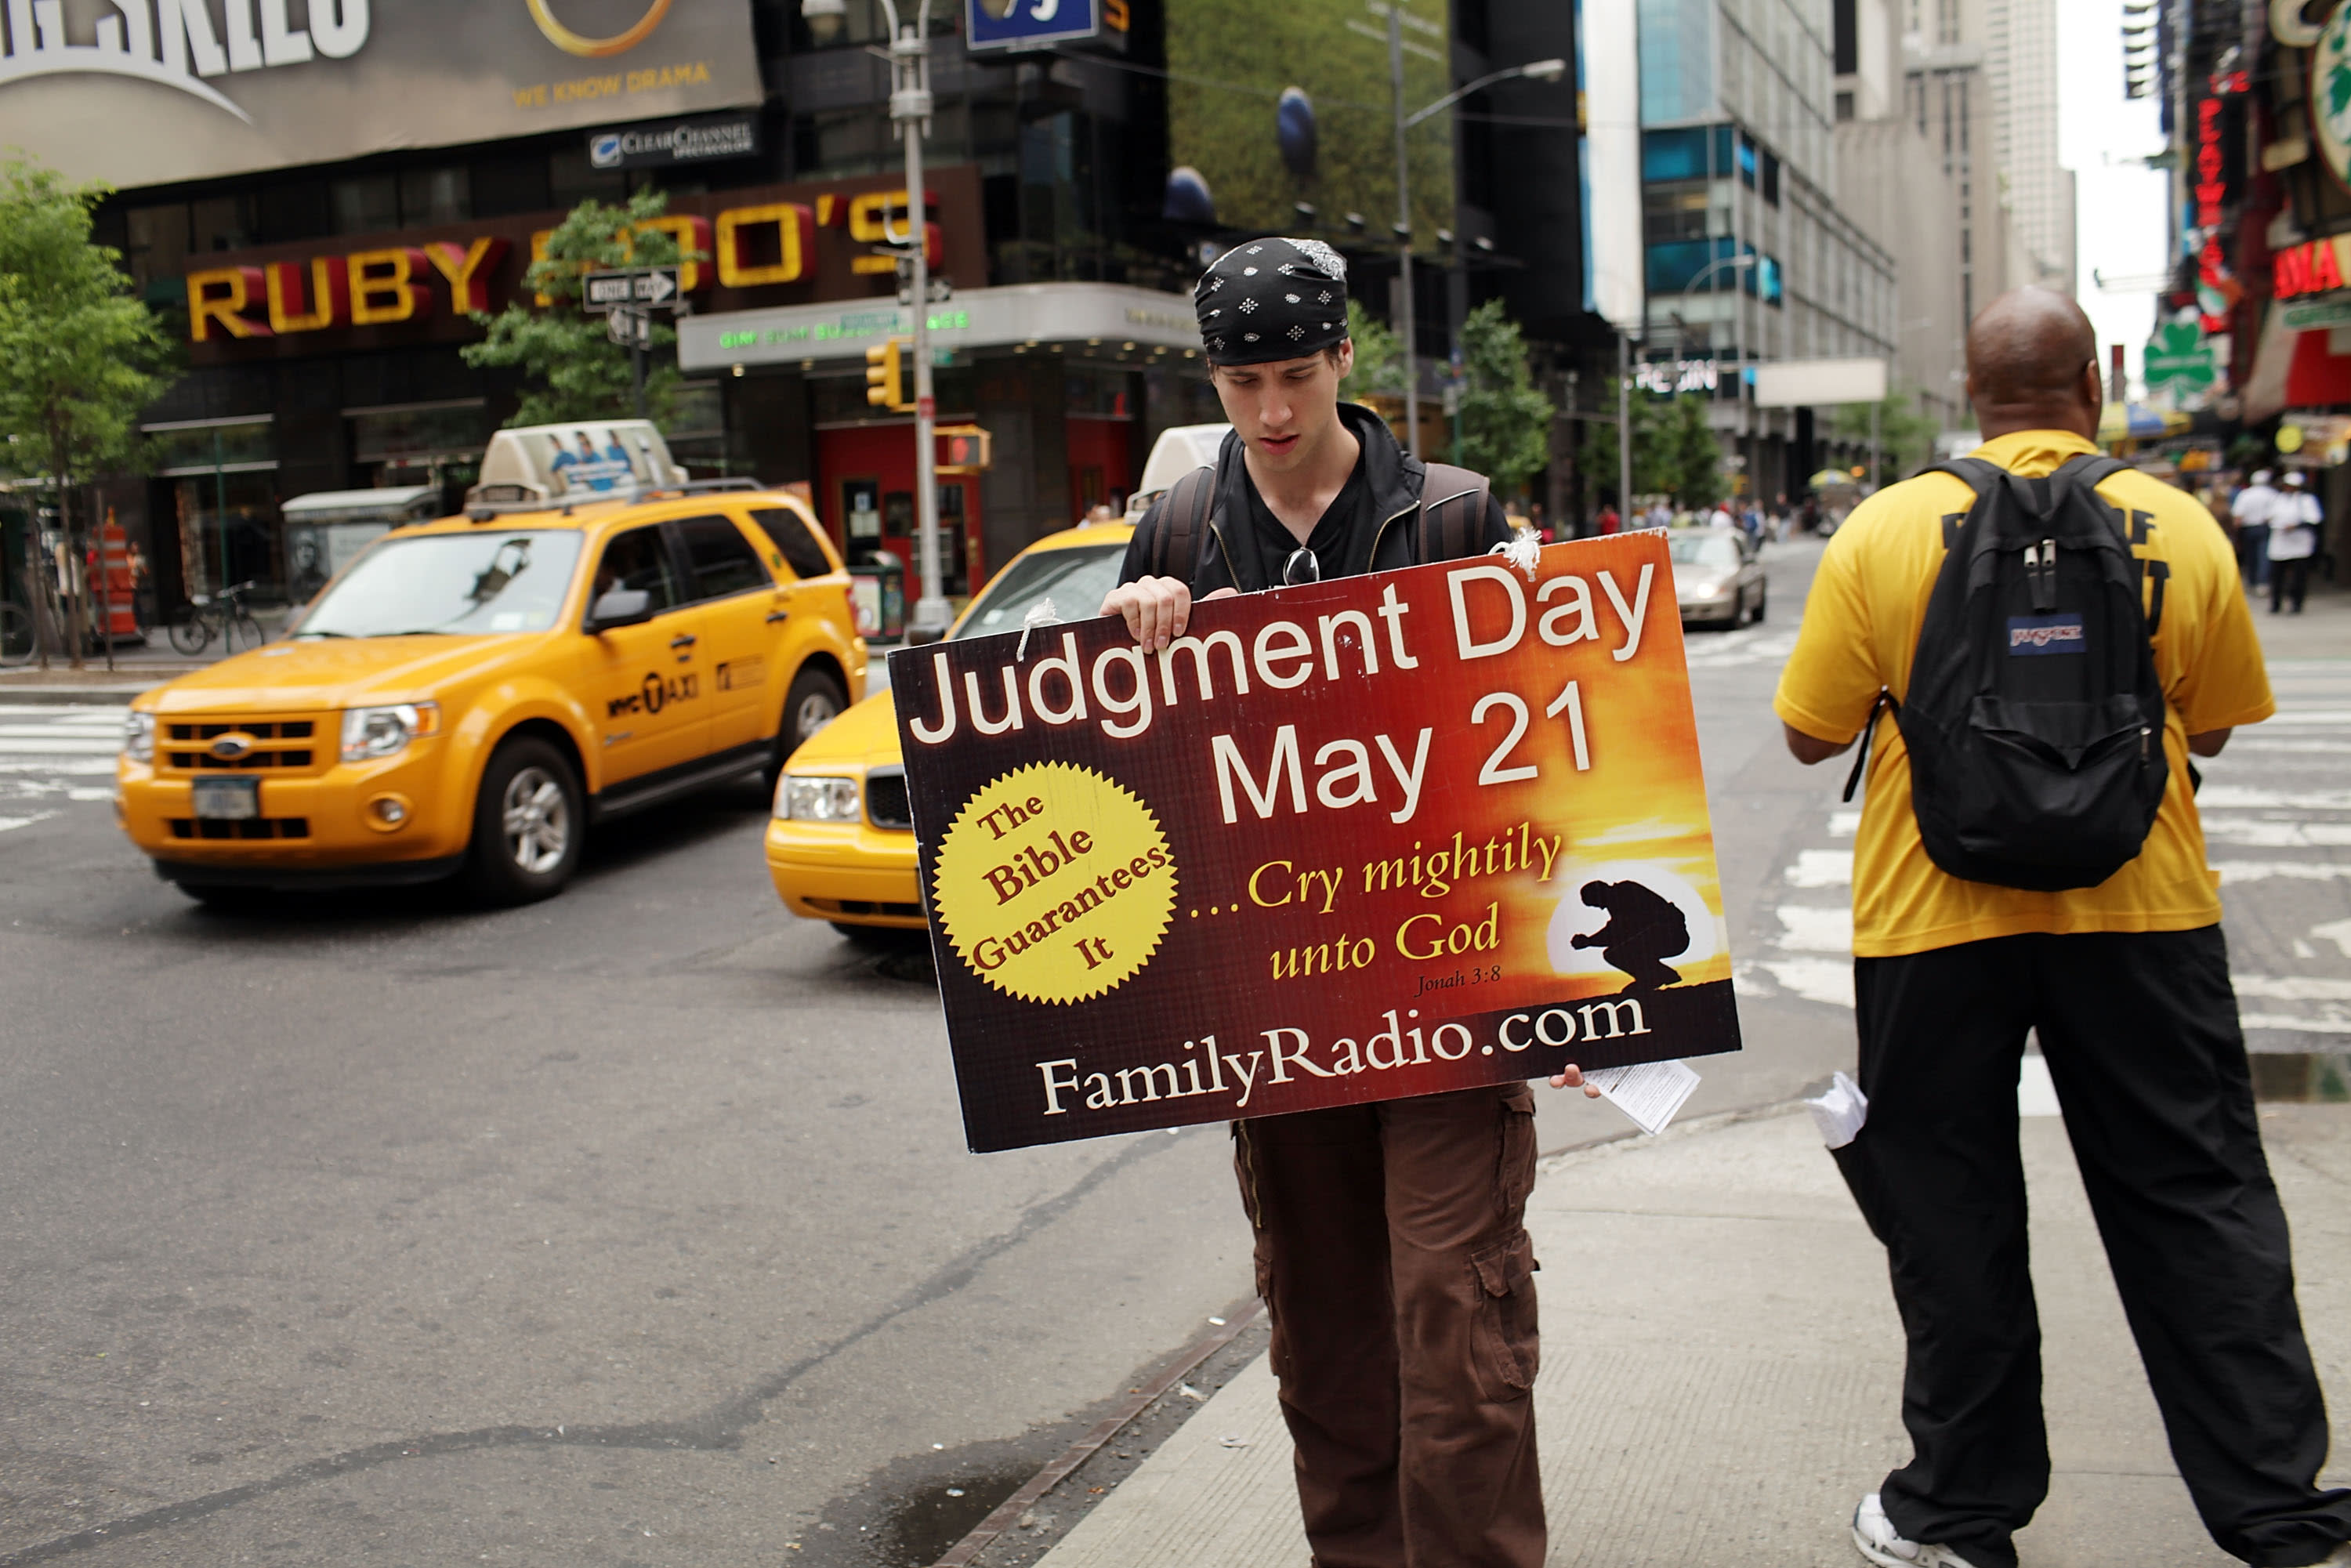 NEW YORK, NY - MAY 13:  Participants in a movement that is proselytizing that the world will end this May 21, Judgment Day, gather on a street corner on May 13, 2011 in New York City. The Christian based movement, which claims thousands of supporters around the country and world, was founded by the Oakland, Calif.-based Harold Camping. Camping is president of Family Stations Inc., a religious broadcasting network that promotes the belief that May 21, 2011 is Judgment Day. Camping claims to have come to this date by a deep and complex study of religious texts. Camping was wrong on his prior end-of-the-world prediction in 1994.  (Photo by Spencer Platt/Getty Images)